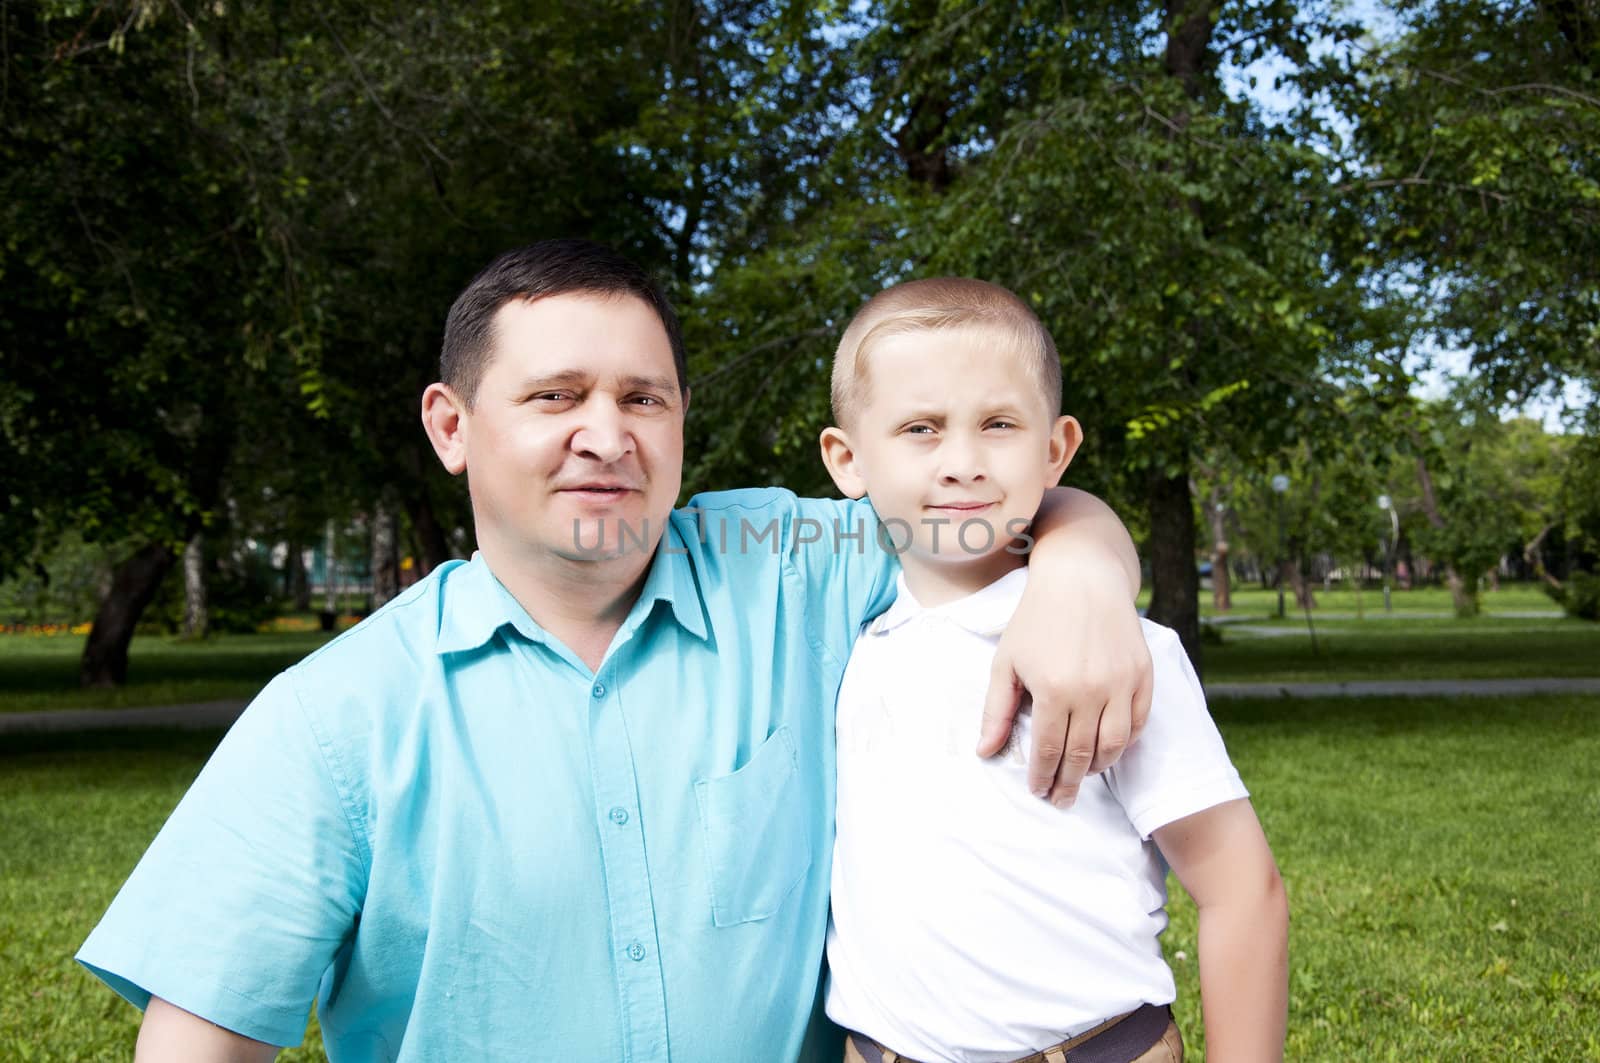 The portrait of the father and the son, stay in park together, are happy